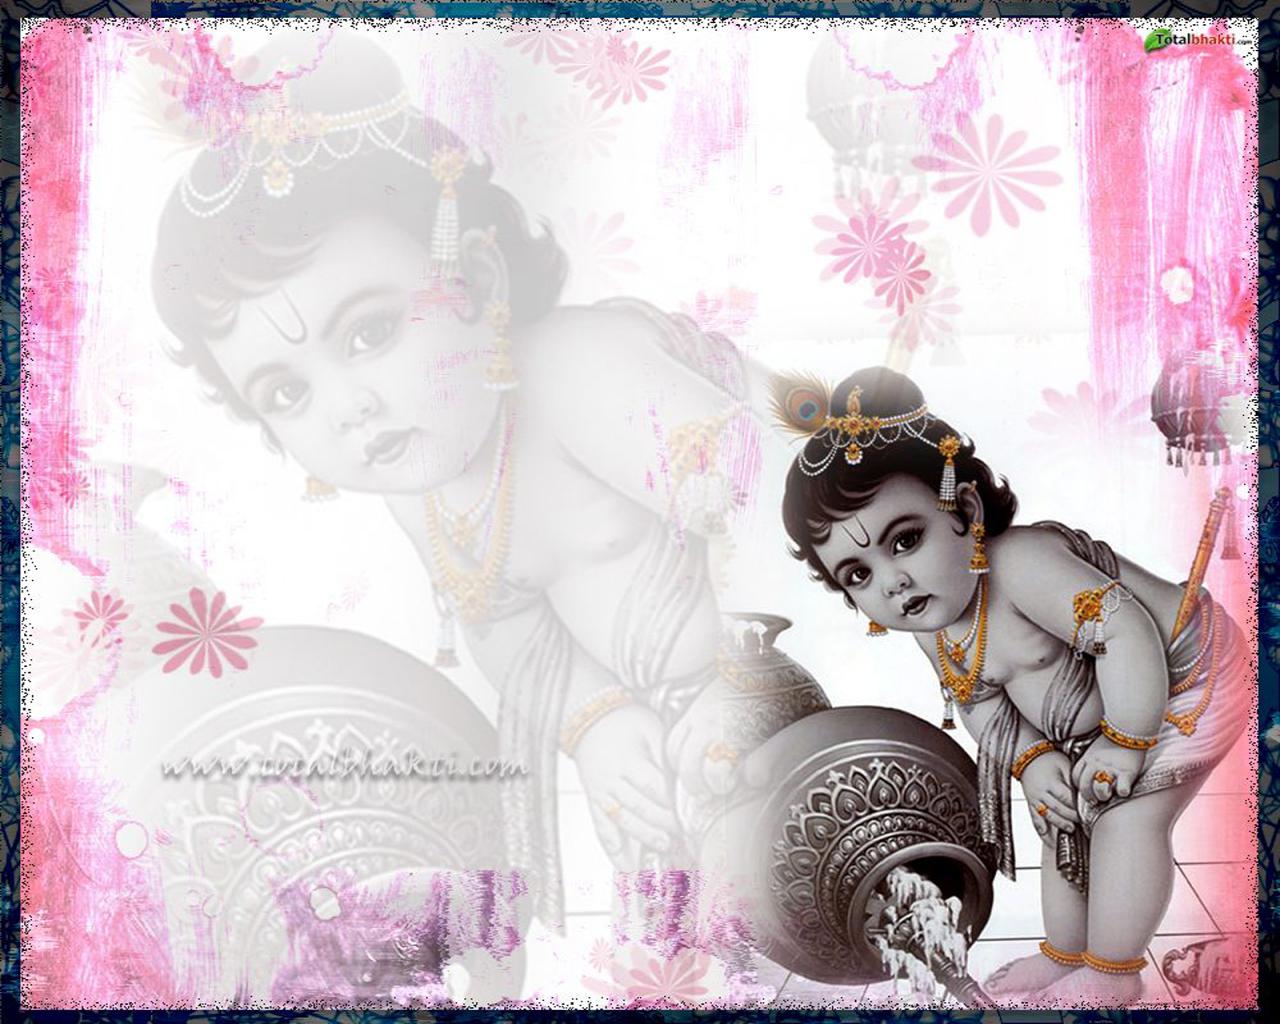 Stunning Collection of Little Krishna Images in Full 4K Resolution - 999+  Top Picks